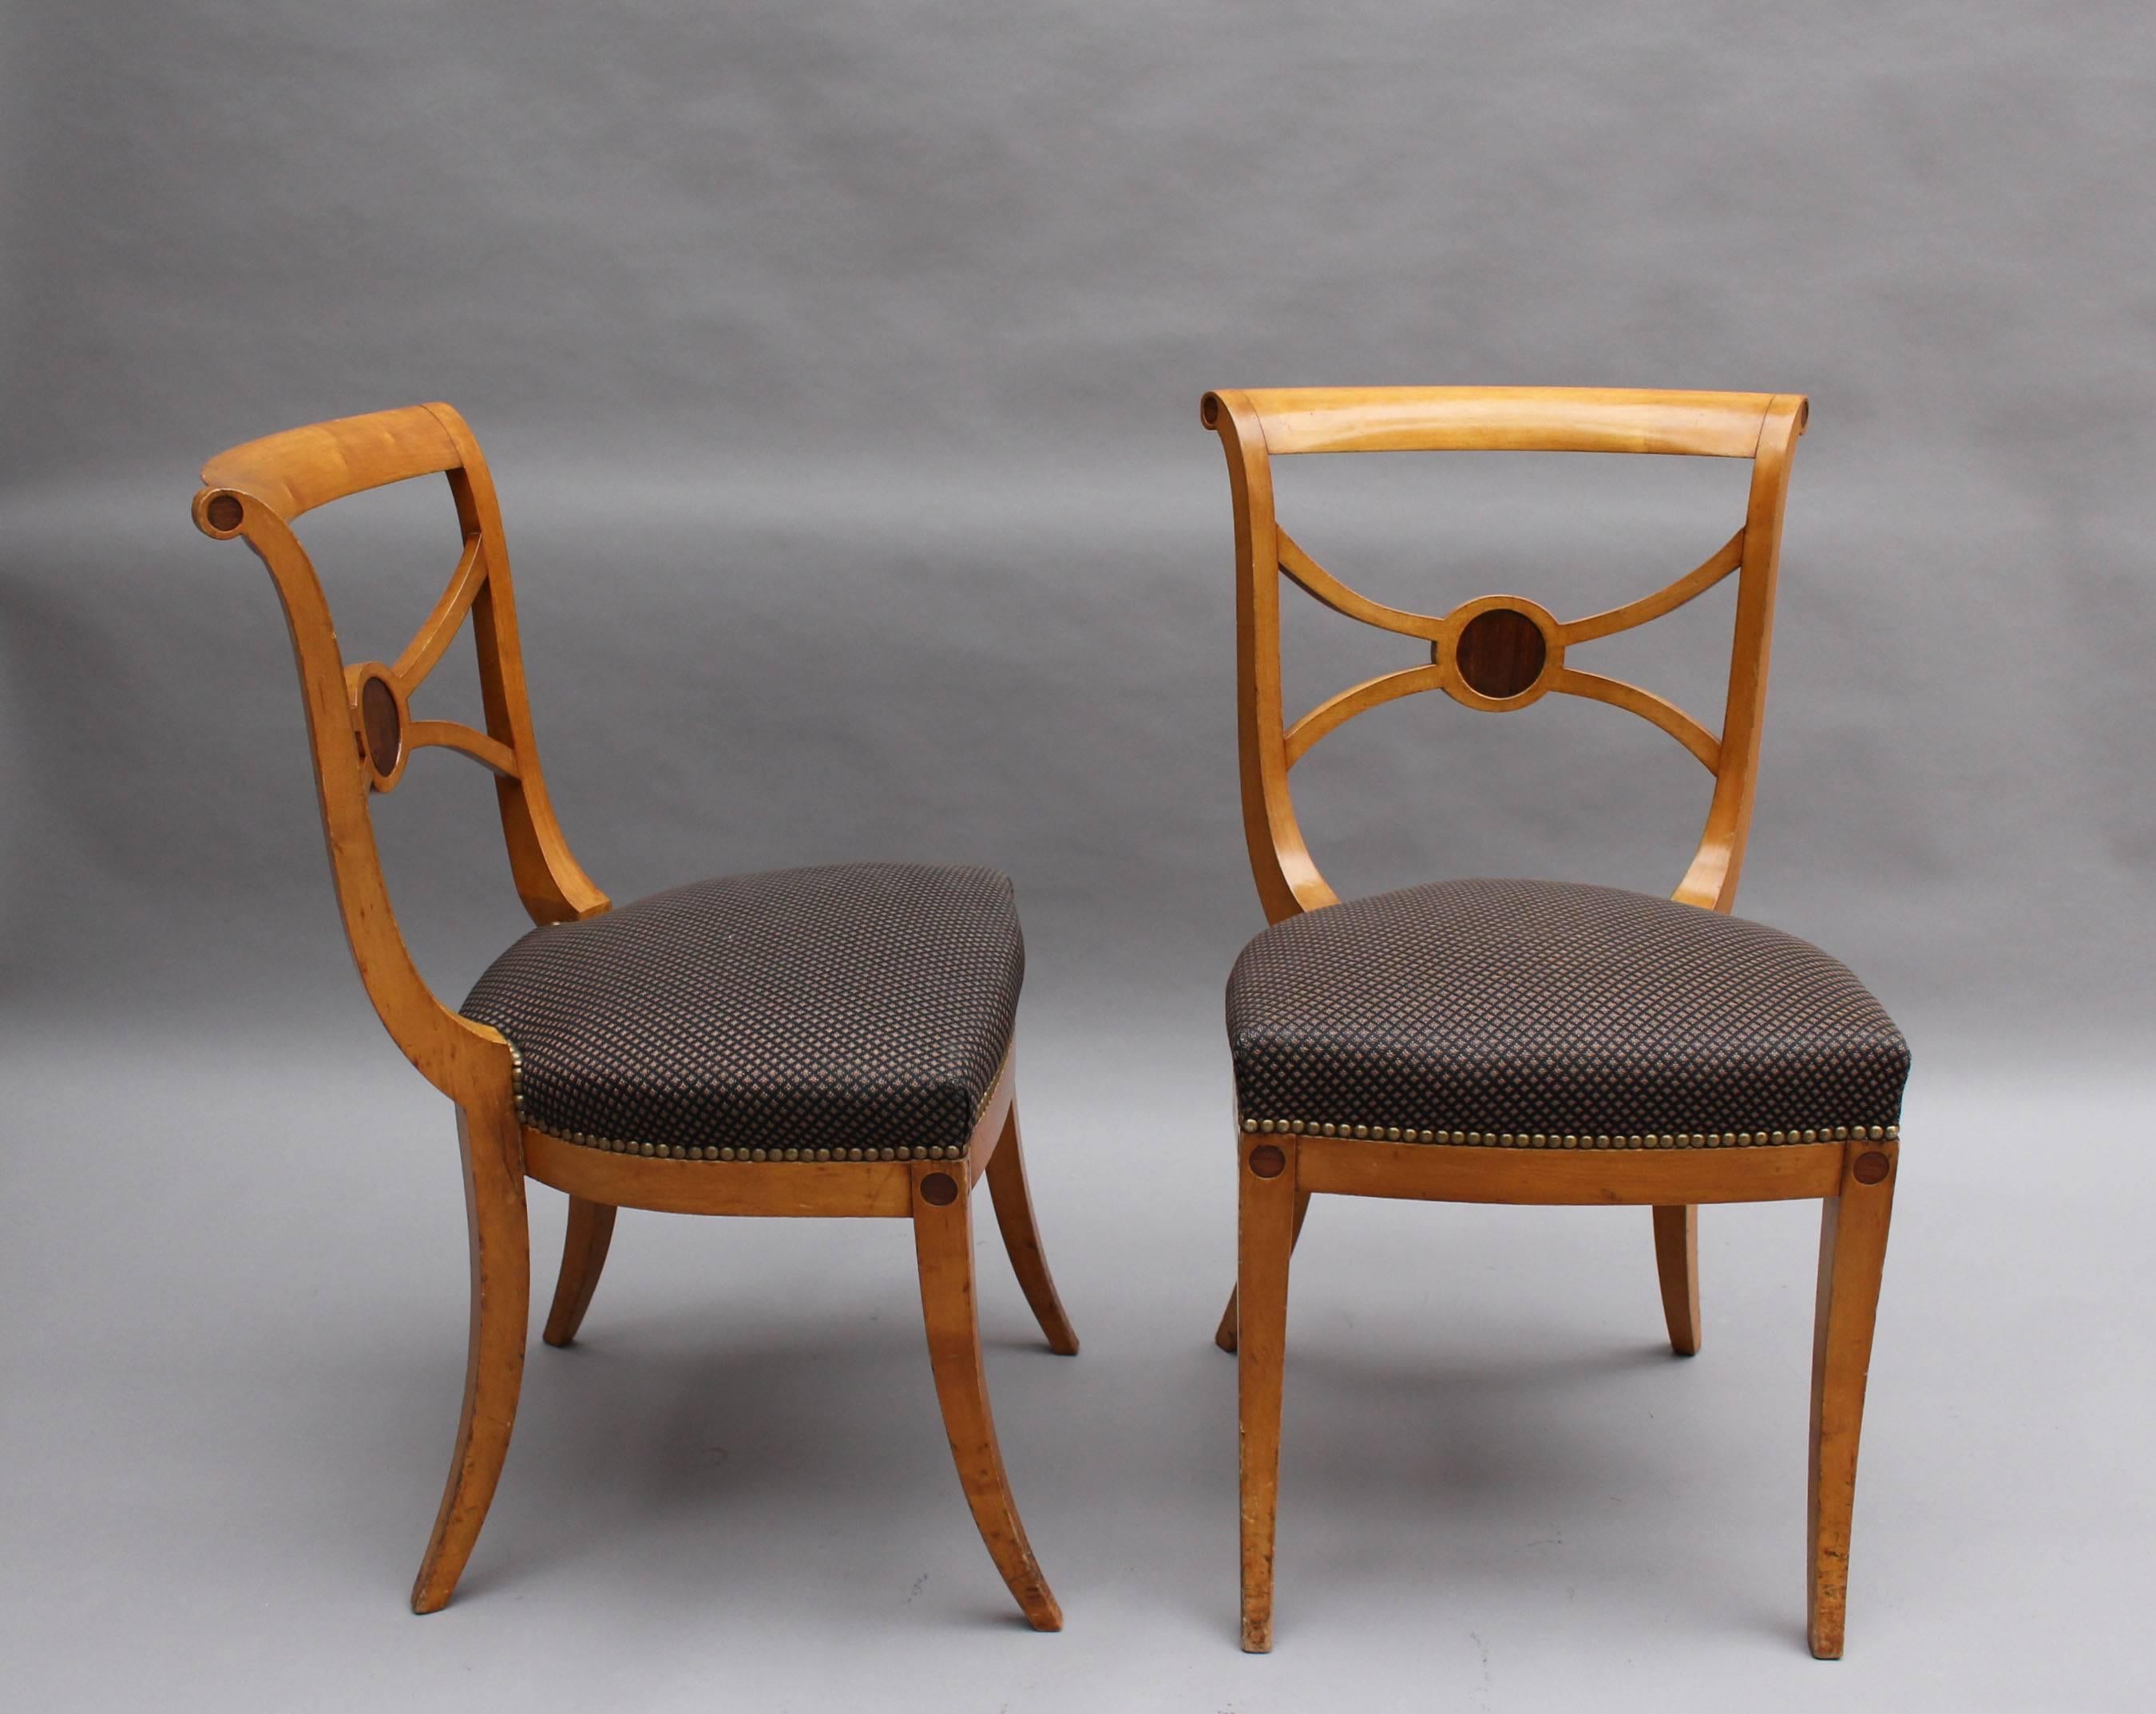 Neoclassical A Set of 14 Fine French Art Deco Chairs by Ernest Boiceau (12 side and 2 arm)